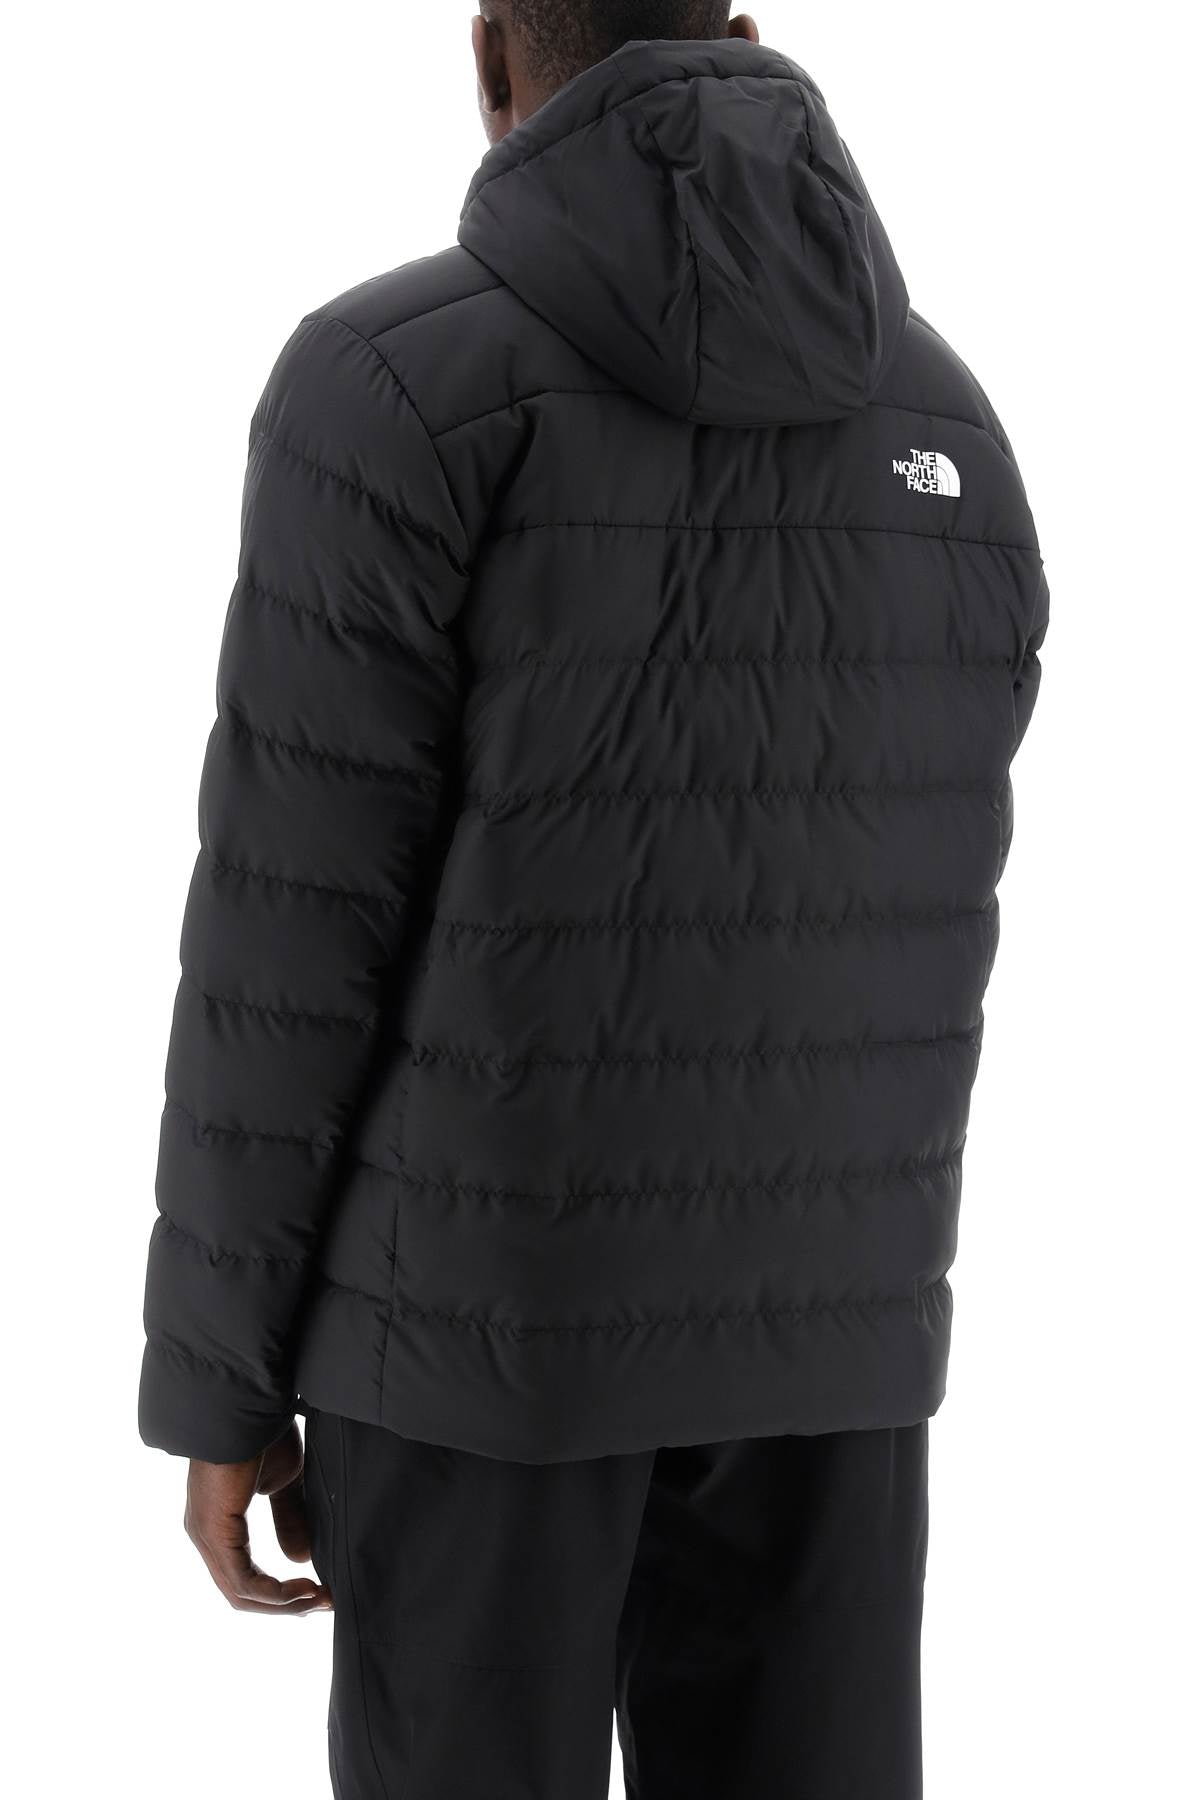 The north face aconcagua iii lightweight puffer jacket-2